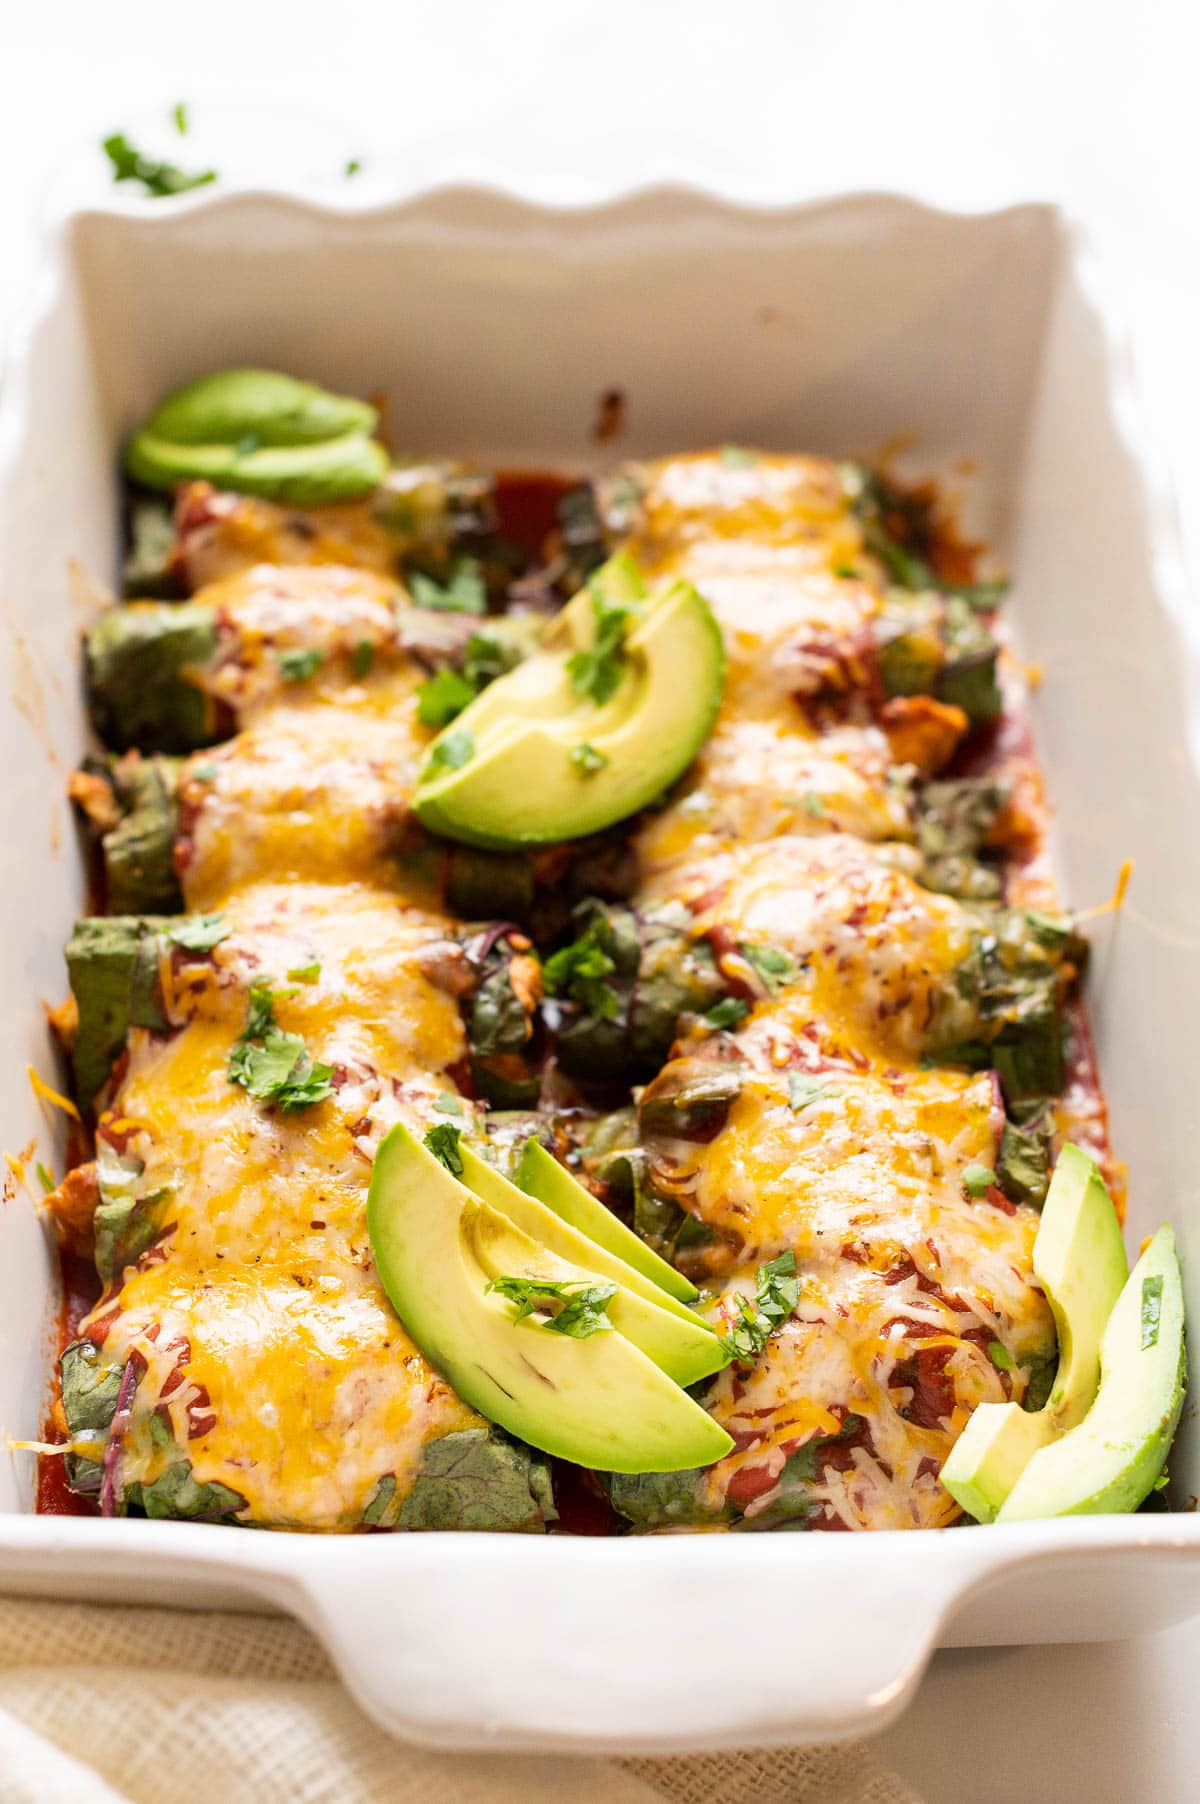 Low carb chicken enchiladas with slices of avocado and cilantro in a baking dish.